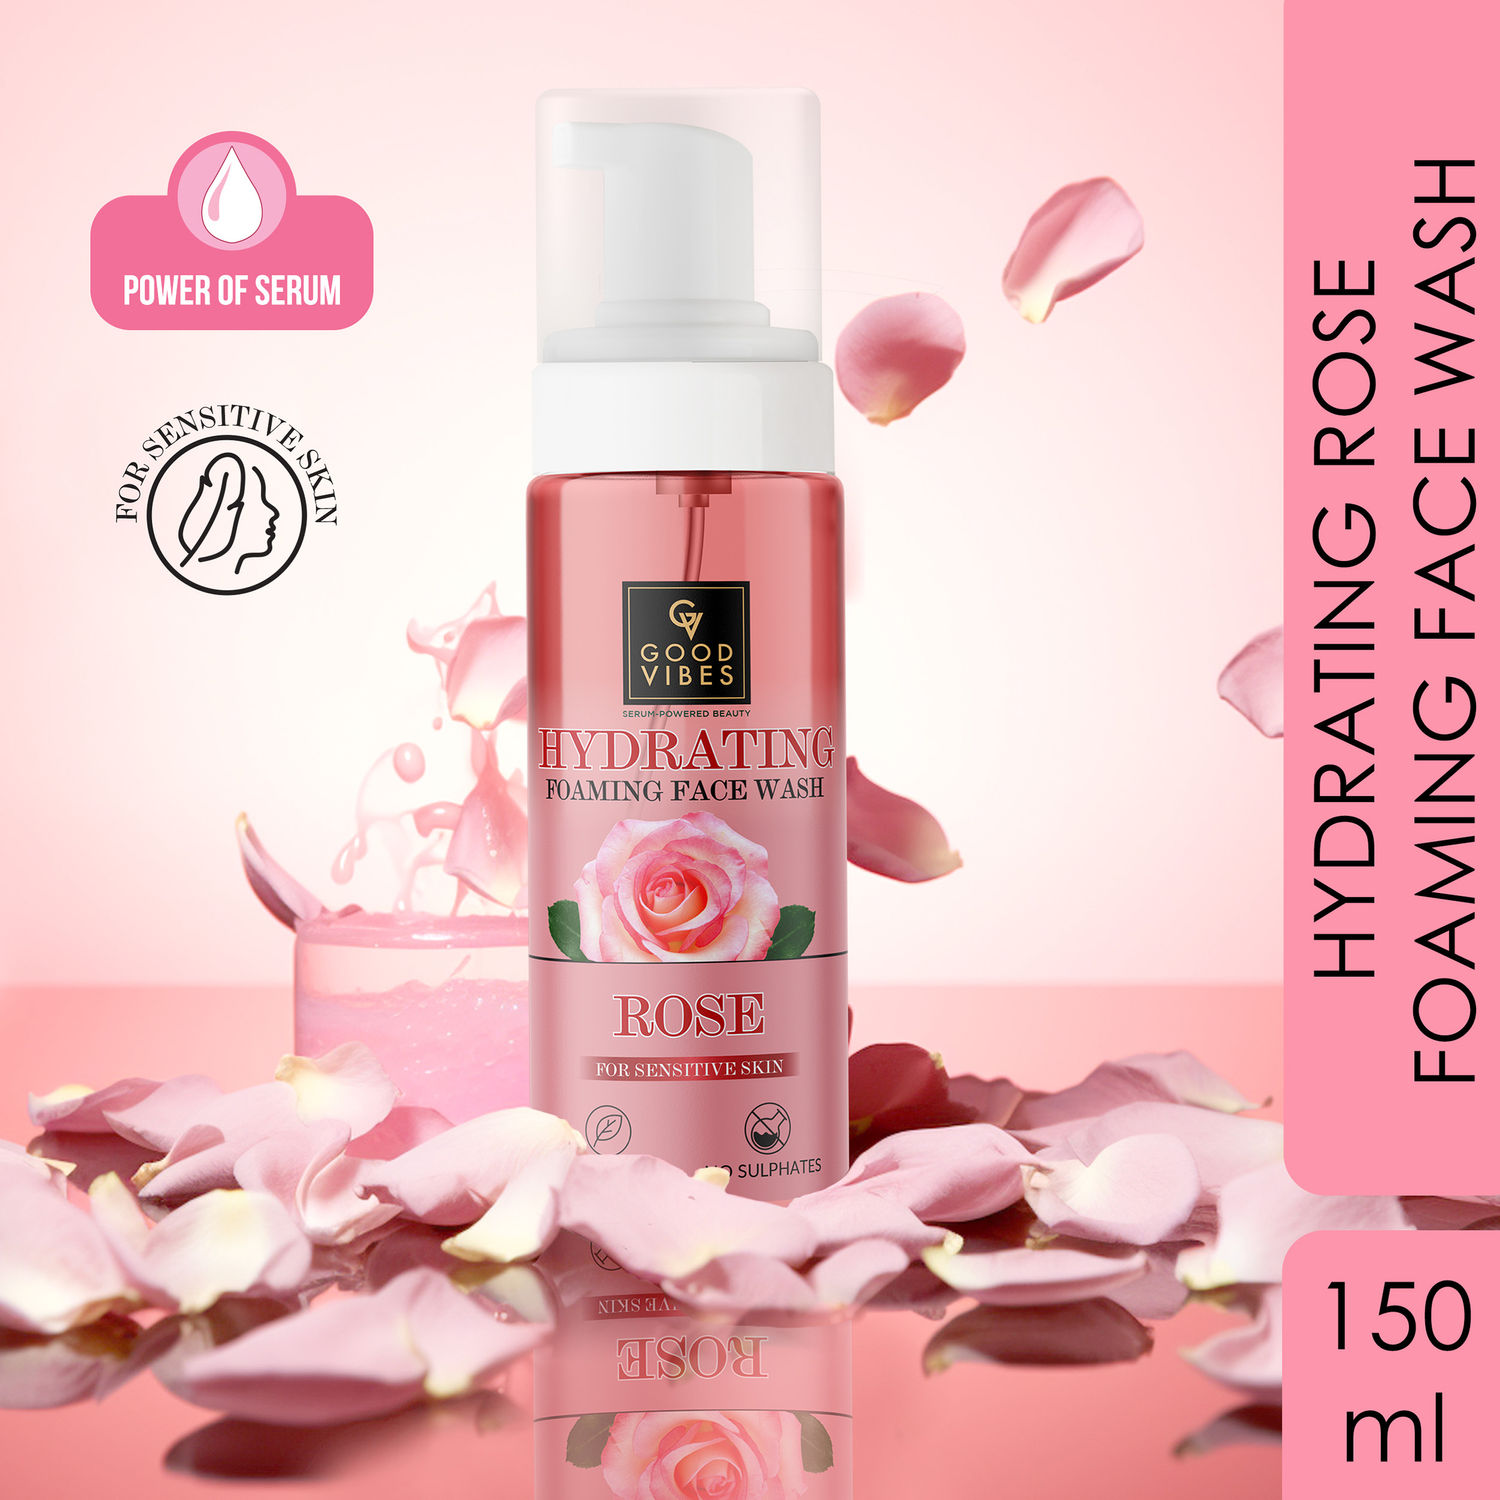 Buy Good Vibes Hydrating Rose Foaming Facewash with Power Of Serum (150ml) | Dermatologically Tested for Sensitive skin | Made from Chaitri Roses - Purplle